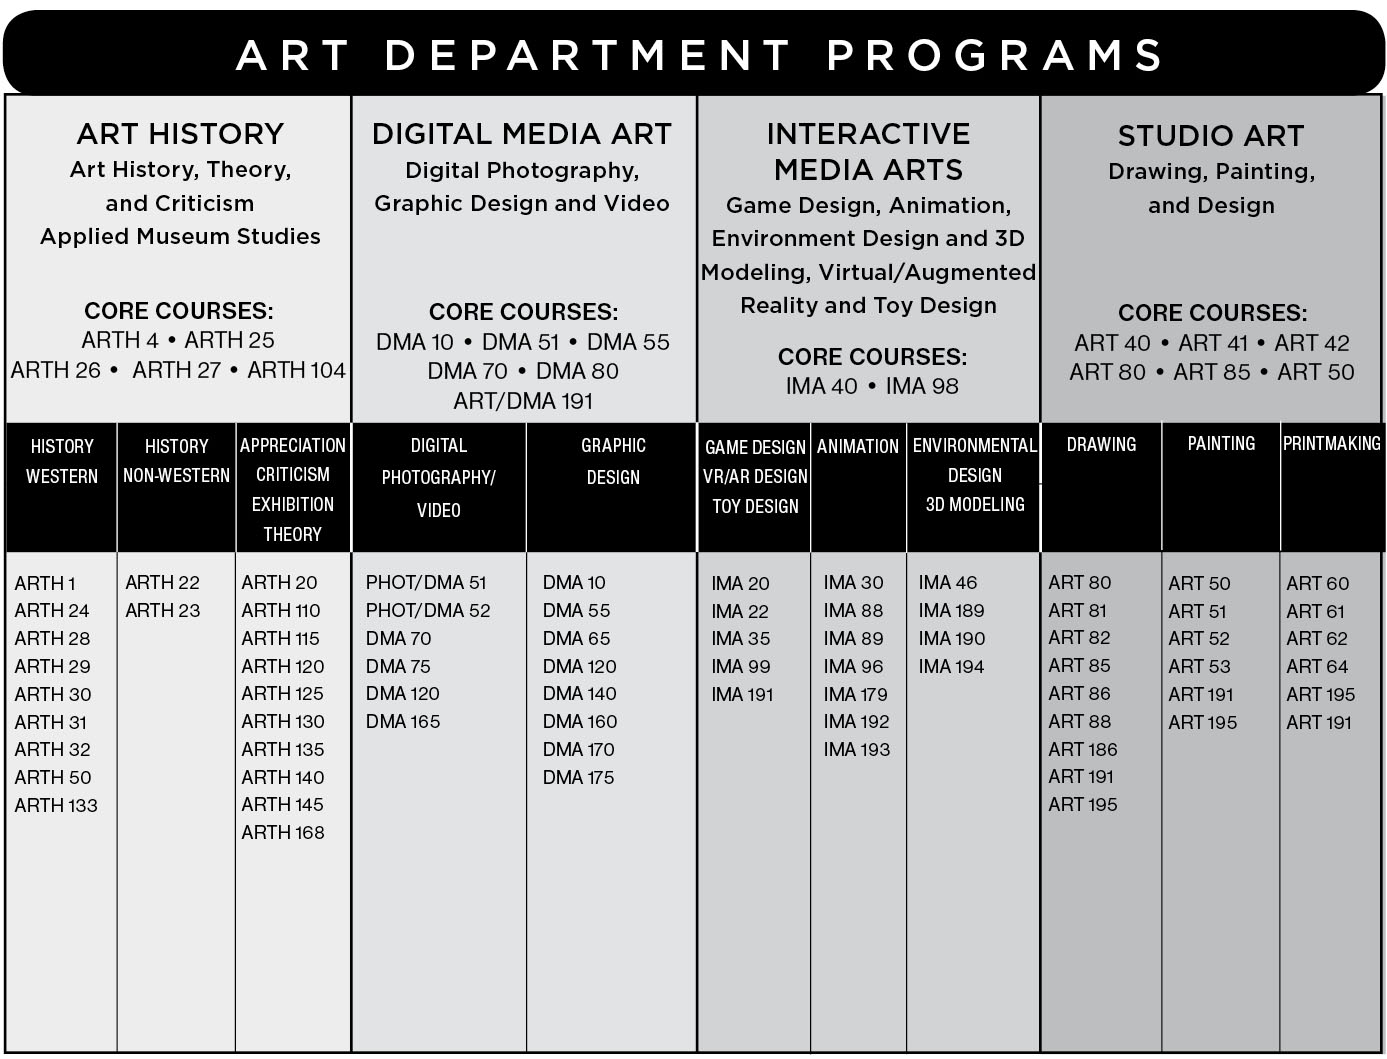 Graphical chart showing the programs and courses in the IVC art department. There are three categories: Art History, Digital Media Art, Interactive Media Arts, and Studio Art. Art History includes Art History, Theory, and Criticism, and Applied Museum Studies. Core courses include ARTH 4, ARTH 25, ARTH 26, ARTH 27, and ARTH 104. Western art history courses include ARTH 1, ARTH 24, ARTH 28, ARTH 29, ARTH 30, ARTH 31, ARTH 32, ARTH 50 and ARTH 133. Non-western art history courses include ARTH 22 and ARTH 23. Appreciation, criticism, exhibition and theory courses include ARTH 20, ARTH 110, ARTH 115, ARTH 120, ARTH 125, ARTH 130, ARTH 135, ARTH 140, ARTH 145 and ARTH 168. Digital Media Art includes Digital Photography,  Graphic Design and Video. Core courses include DMA 10, DMA 51, DMA 55, DMA 70, DMA 80, and ART/DMA 191. Digital photography/video courses include PHOT/DMA 51, PHOT/DMA 52, DMA 70, DMA 75, DMA 120 and DMA 165. Graphic design courses include DMA 10, DMA 55, DMA 65, DMA 120, DMA 140, DMA 160, DMA 170, and DMA 175. Interactive Media Arts includes Game Design, Animation, Environment Design and 3D Modeling, Virtual/Augmented Reality and Toy Design. Core courses include IMA 40 and IMA 98. Game design, VR/AR design and toy design courses include IMA 20, IMA 22, IMA 35, IMA 99 and IMA 191. Animation courses include IMA 30, IMA 88, IMA 89, IMA 96, IMA 179, IMA 192, and IMA 193. Environmental design and 3D modeling courses include IMA 46, IMA 189, IMA 190, and IMA 194. Studio Art includes Drawing, Painting, and Design. Core courses include ART 40, ART 41, ART 42, ART 80, ART 85 and ART 50. Drawing courses include ART 80, ART 81, ART 82, ART 85, ART 86, ART 88, ART 186, ART 191, and ART 195. Painting courses include ART 50, ART 51, ART 52, ART 53, ART 191, and ART 195. Printmaking courses include ART 60, ART 61, ART 62, ART 64, ART 195 and ART 191.